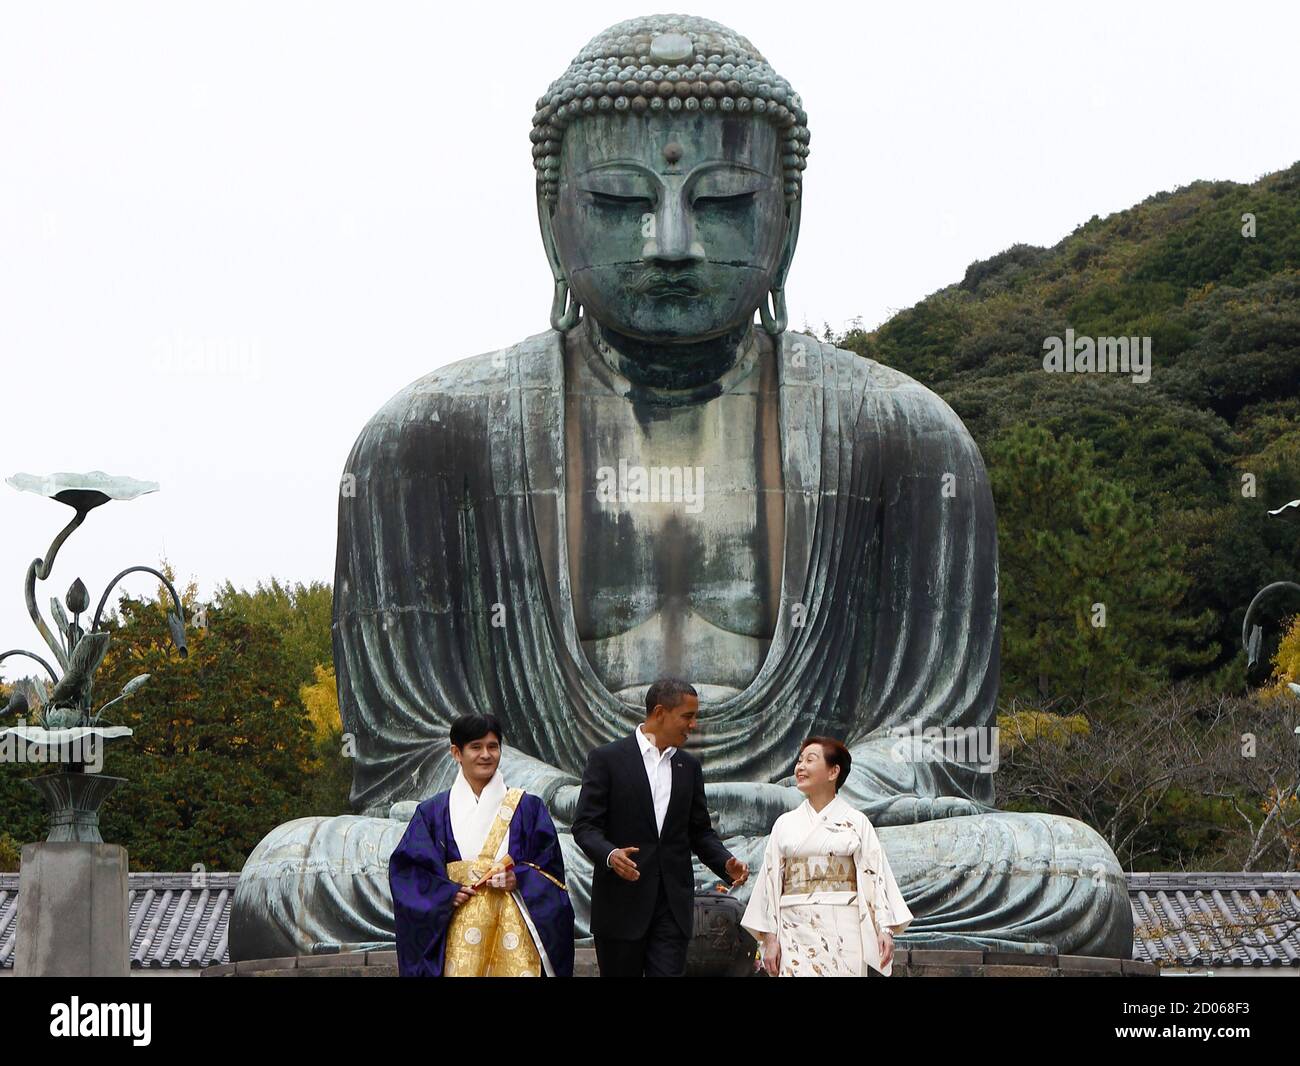 U.S. President Barack Obama stands between Takao Sato (L), chief monk of the Kotoku-in Temple, and Michiko Sato, the director of the temple, during a visit to the Great Buddha statue in Kamakura November 14, 2010.  REUTERS/Jim Young      (JAPAN - Tags: POLITICS RELIGION) Stock Photo